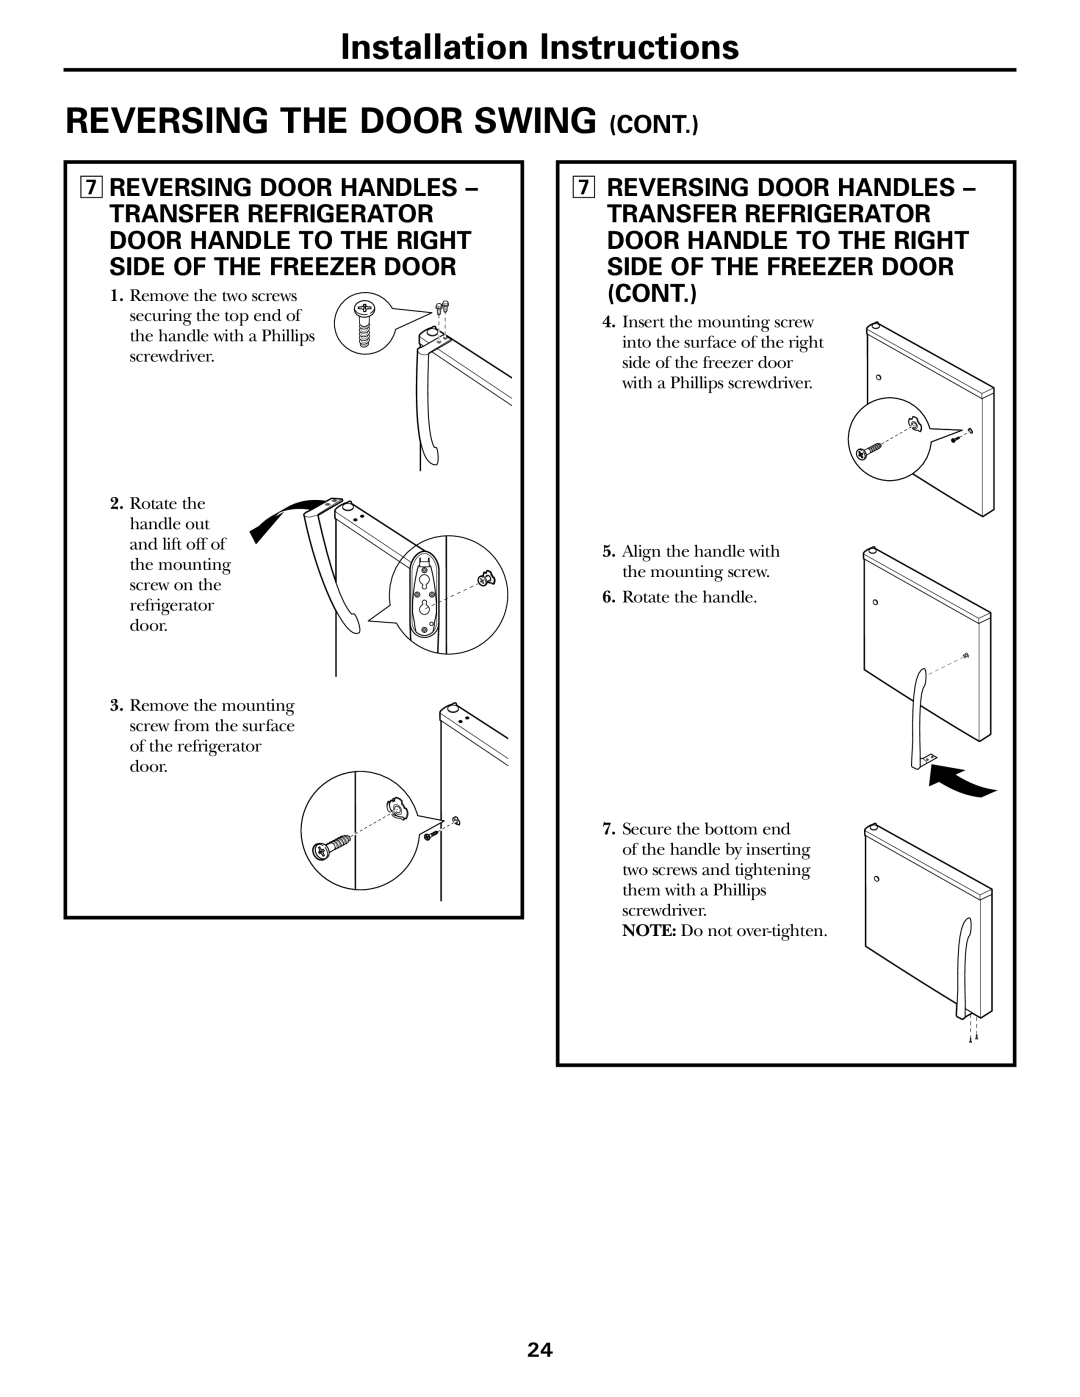 GE GTL21, GTH21 installation instructions Installation Instructions REVERSING THE DOOR SWING CONT, Remove the two screws 